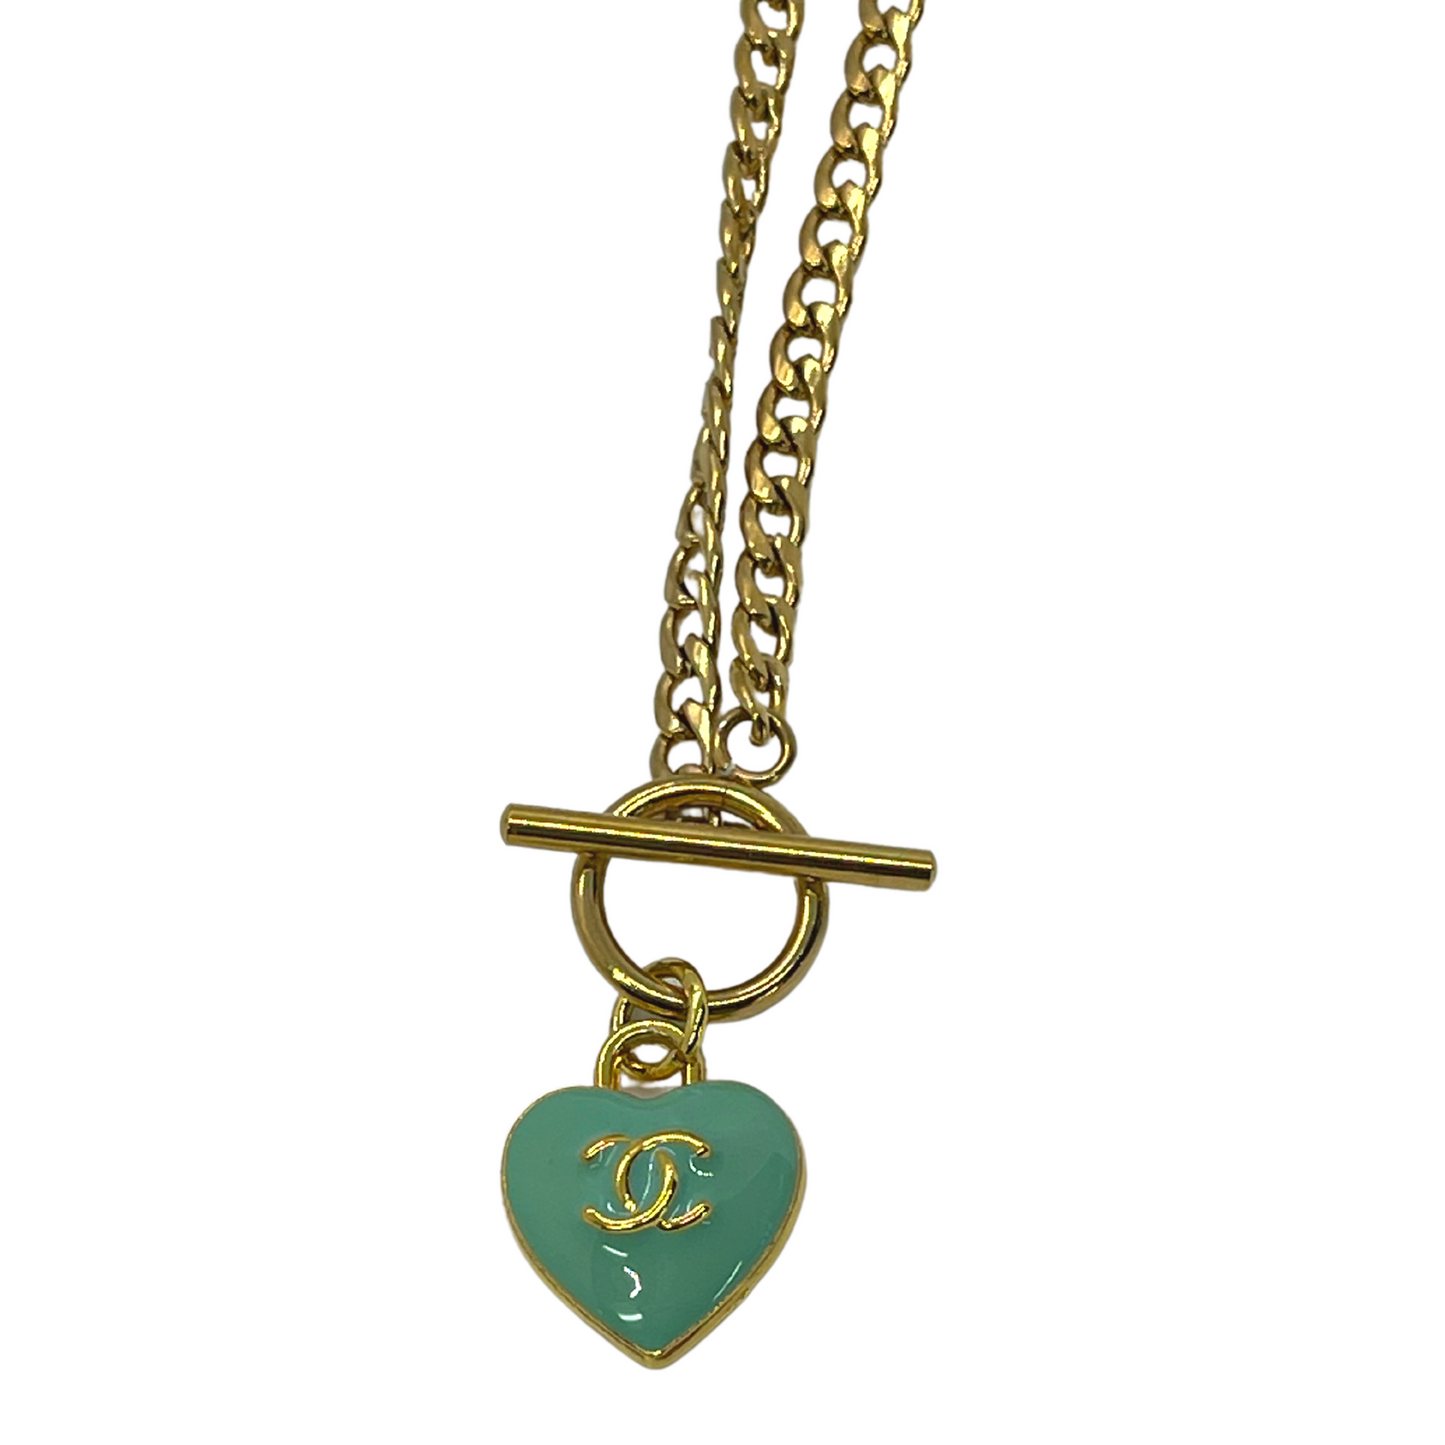 Authentic Chanel Green Heart Charm | Reworked Gold 15.5" Necklace